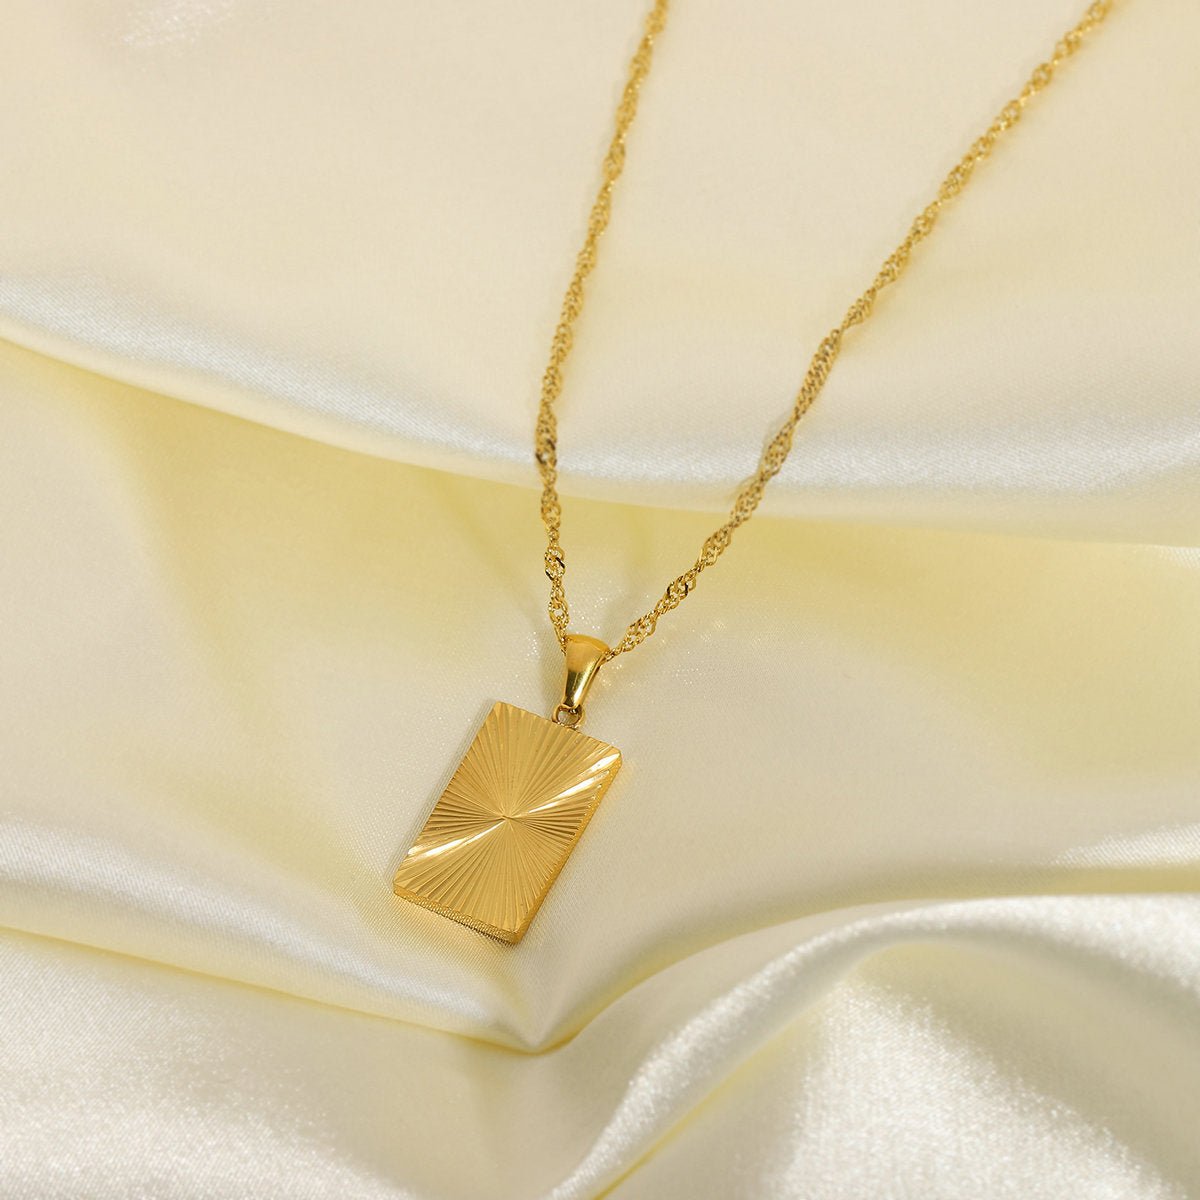 Square Necklace - Gemlly